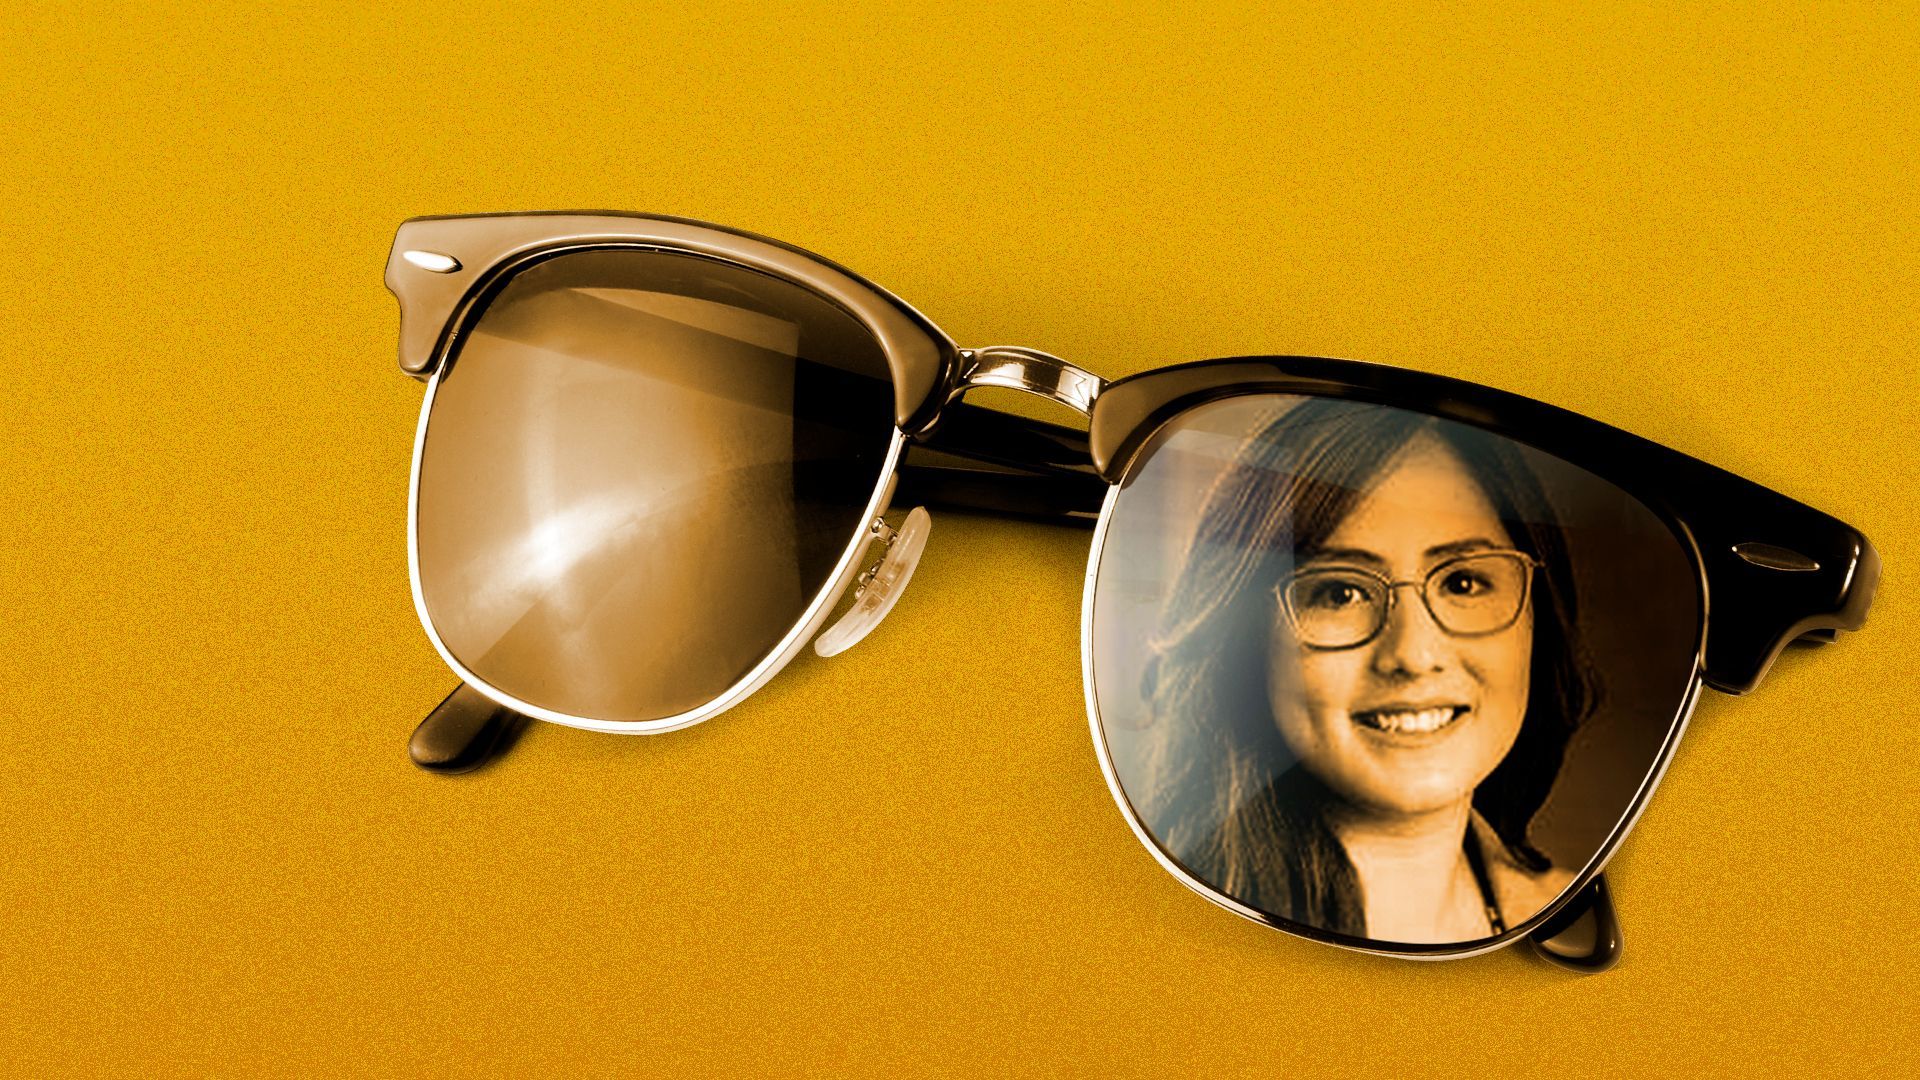 Photo illustration of sunglasses with a photo of Jessica Ramirez in the lens.